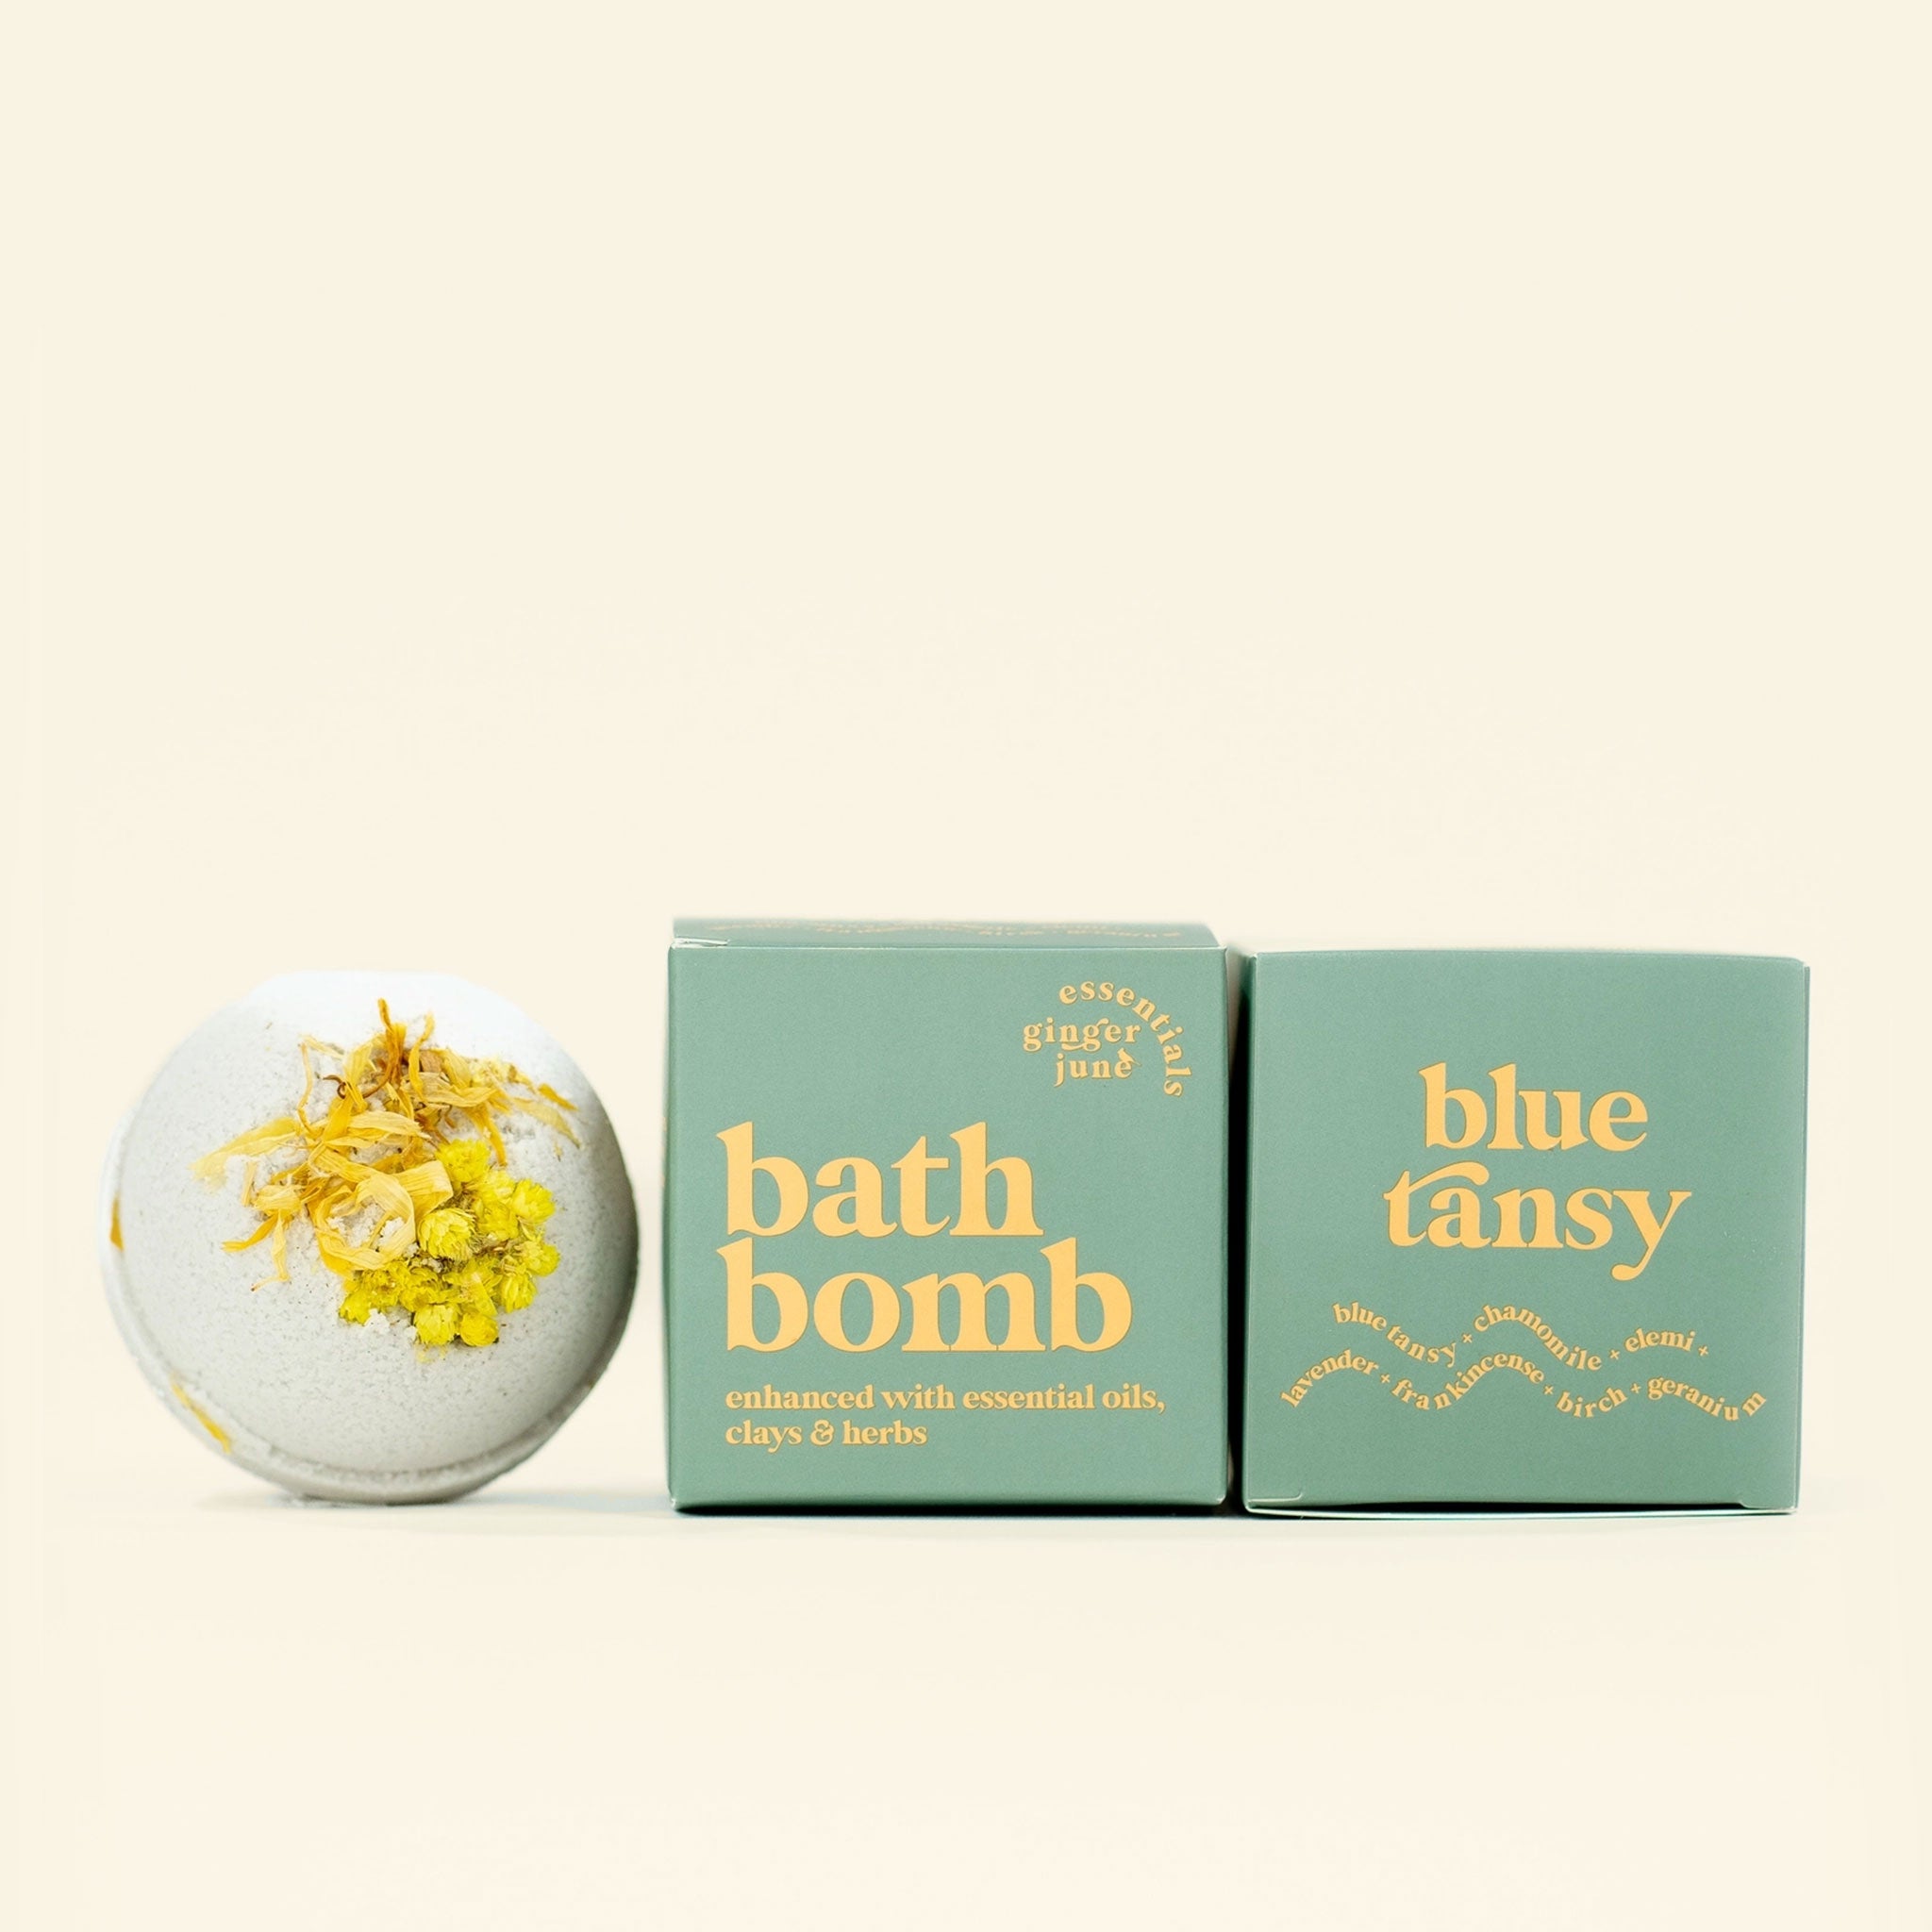 On a neutral background is a green bath bomb with a green box next to it that reads, "bath bomb enhanced with essential oils, clays & herbs"